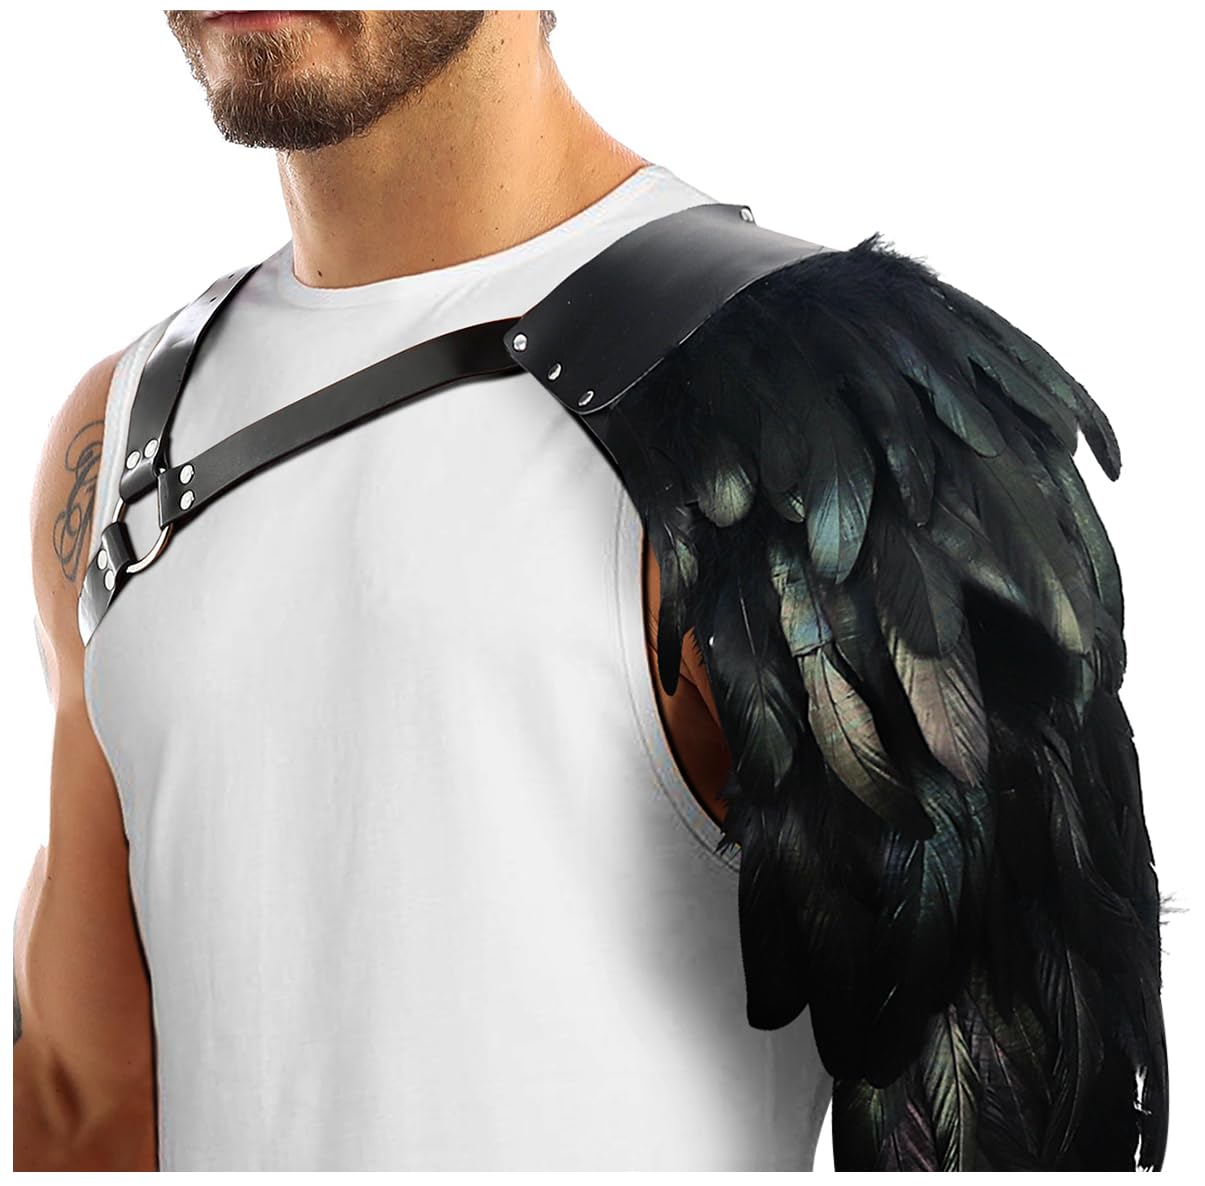 L'VOW Gothic Feather Harness Costume for Men Adjustable Faux PU Leather Shoulder Armor Medieval Guards for Halloween Cosplay Black